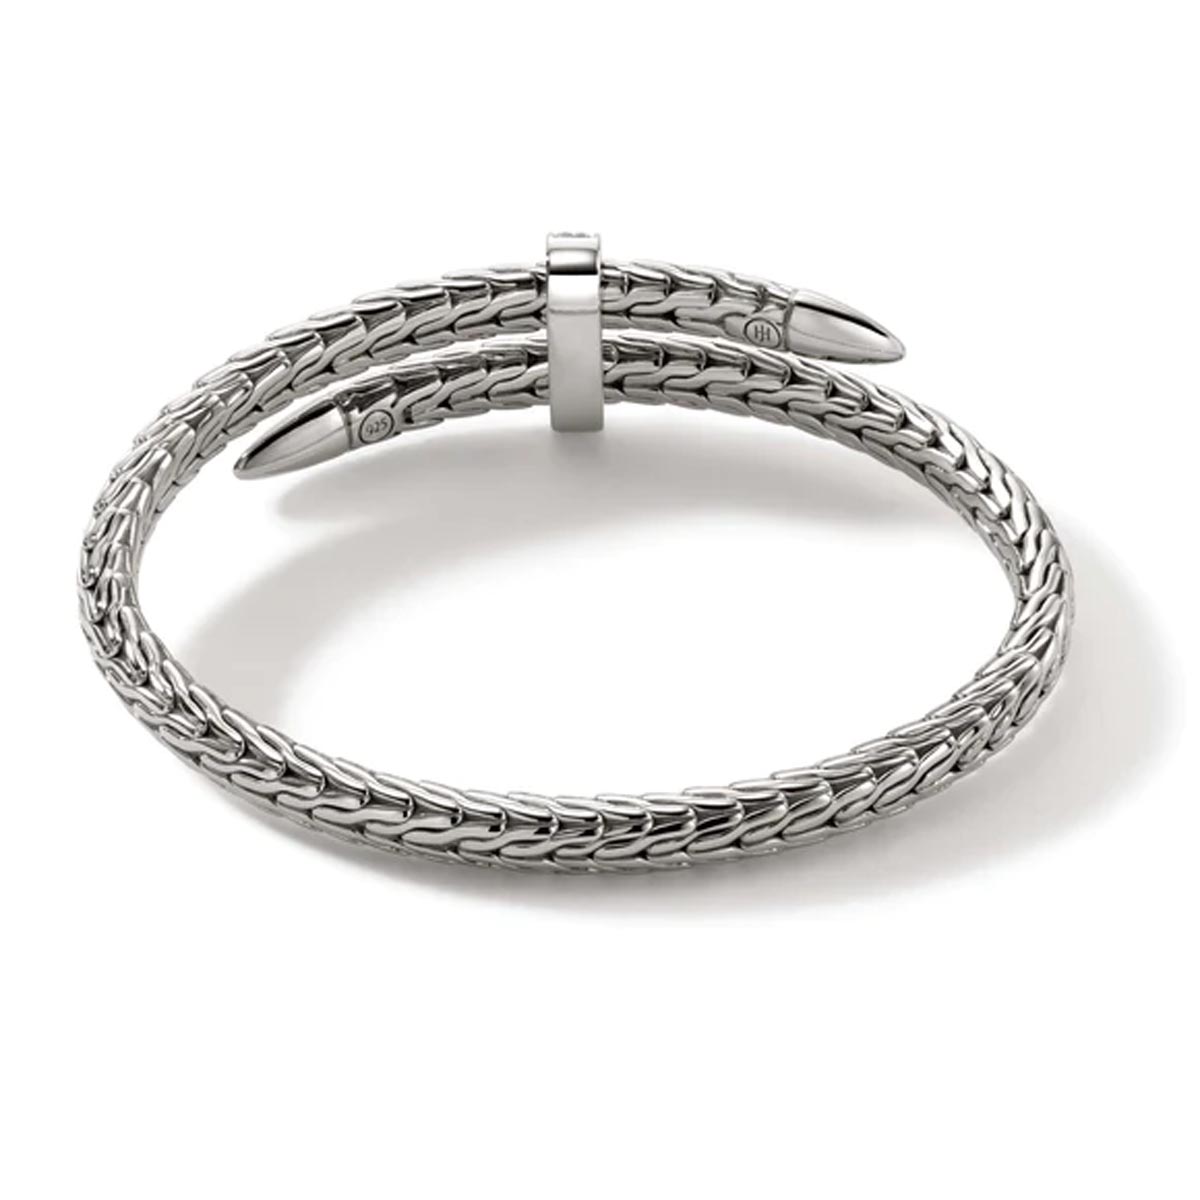 John Hardy Classic Chain Collection Bypass Bangle Bracelet in Sterling Silver with Diamonds (1/4ct tw)